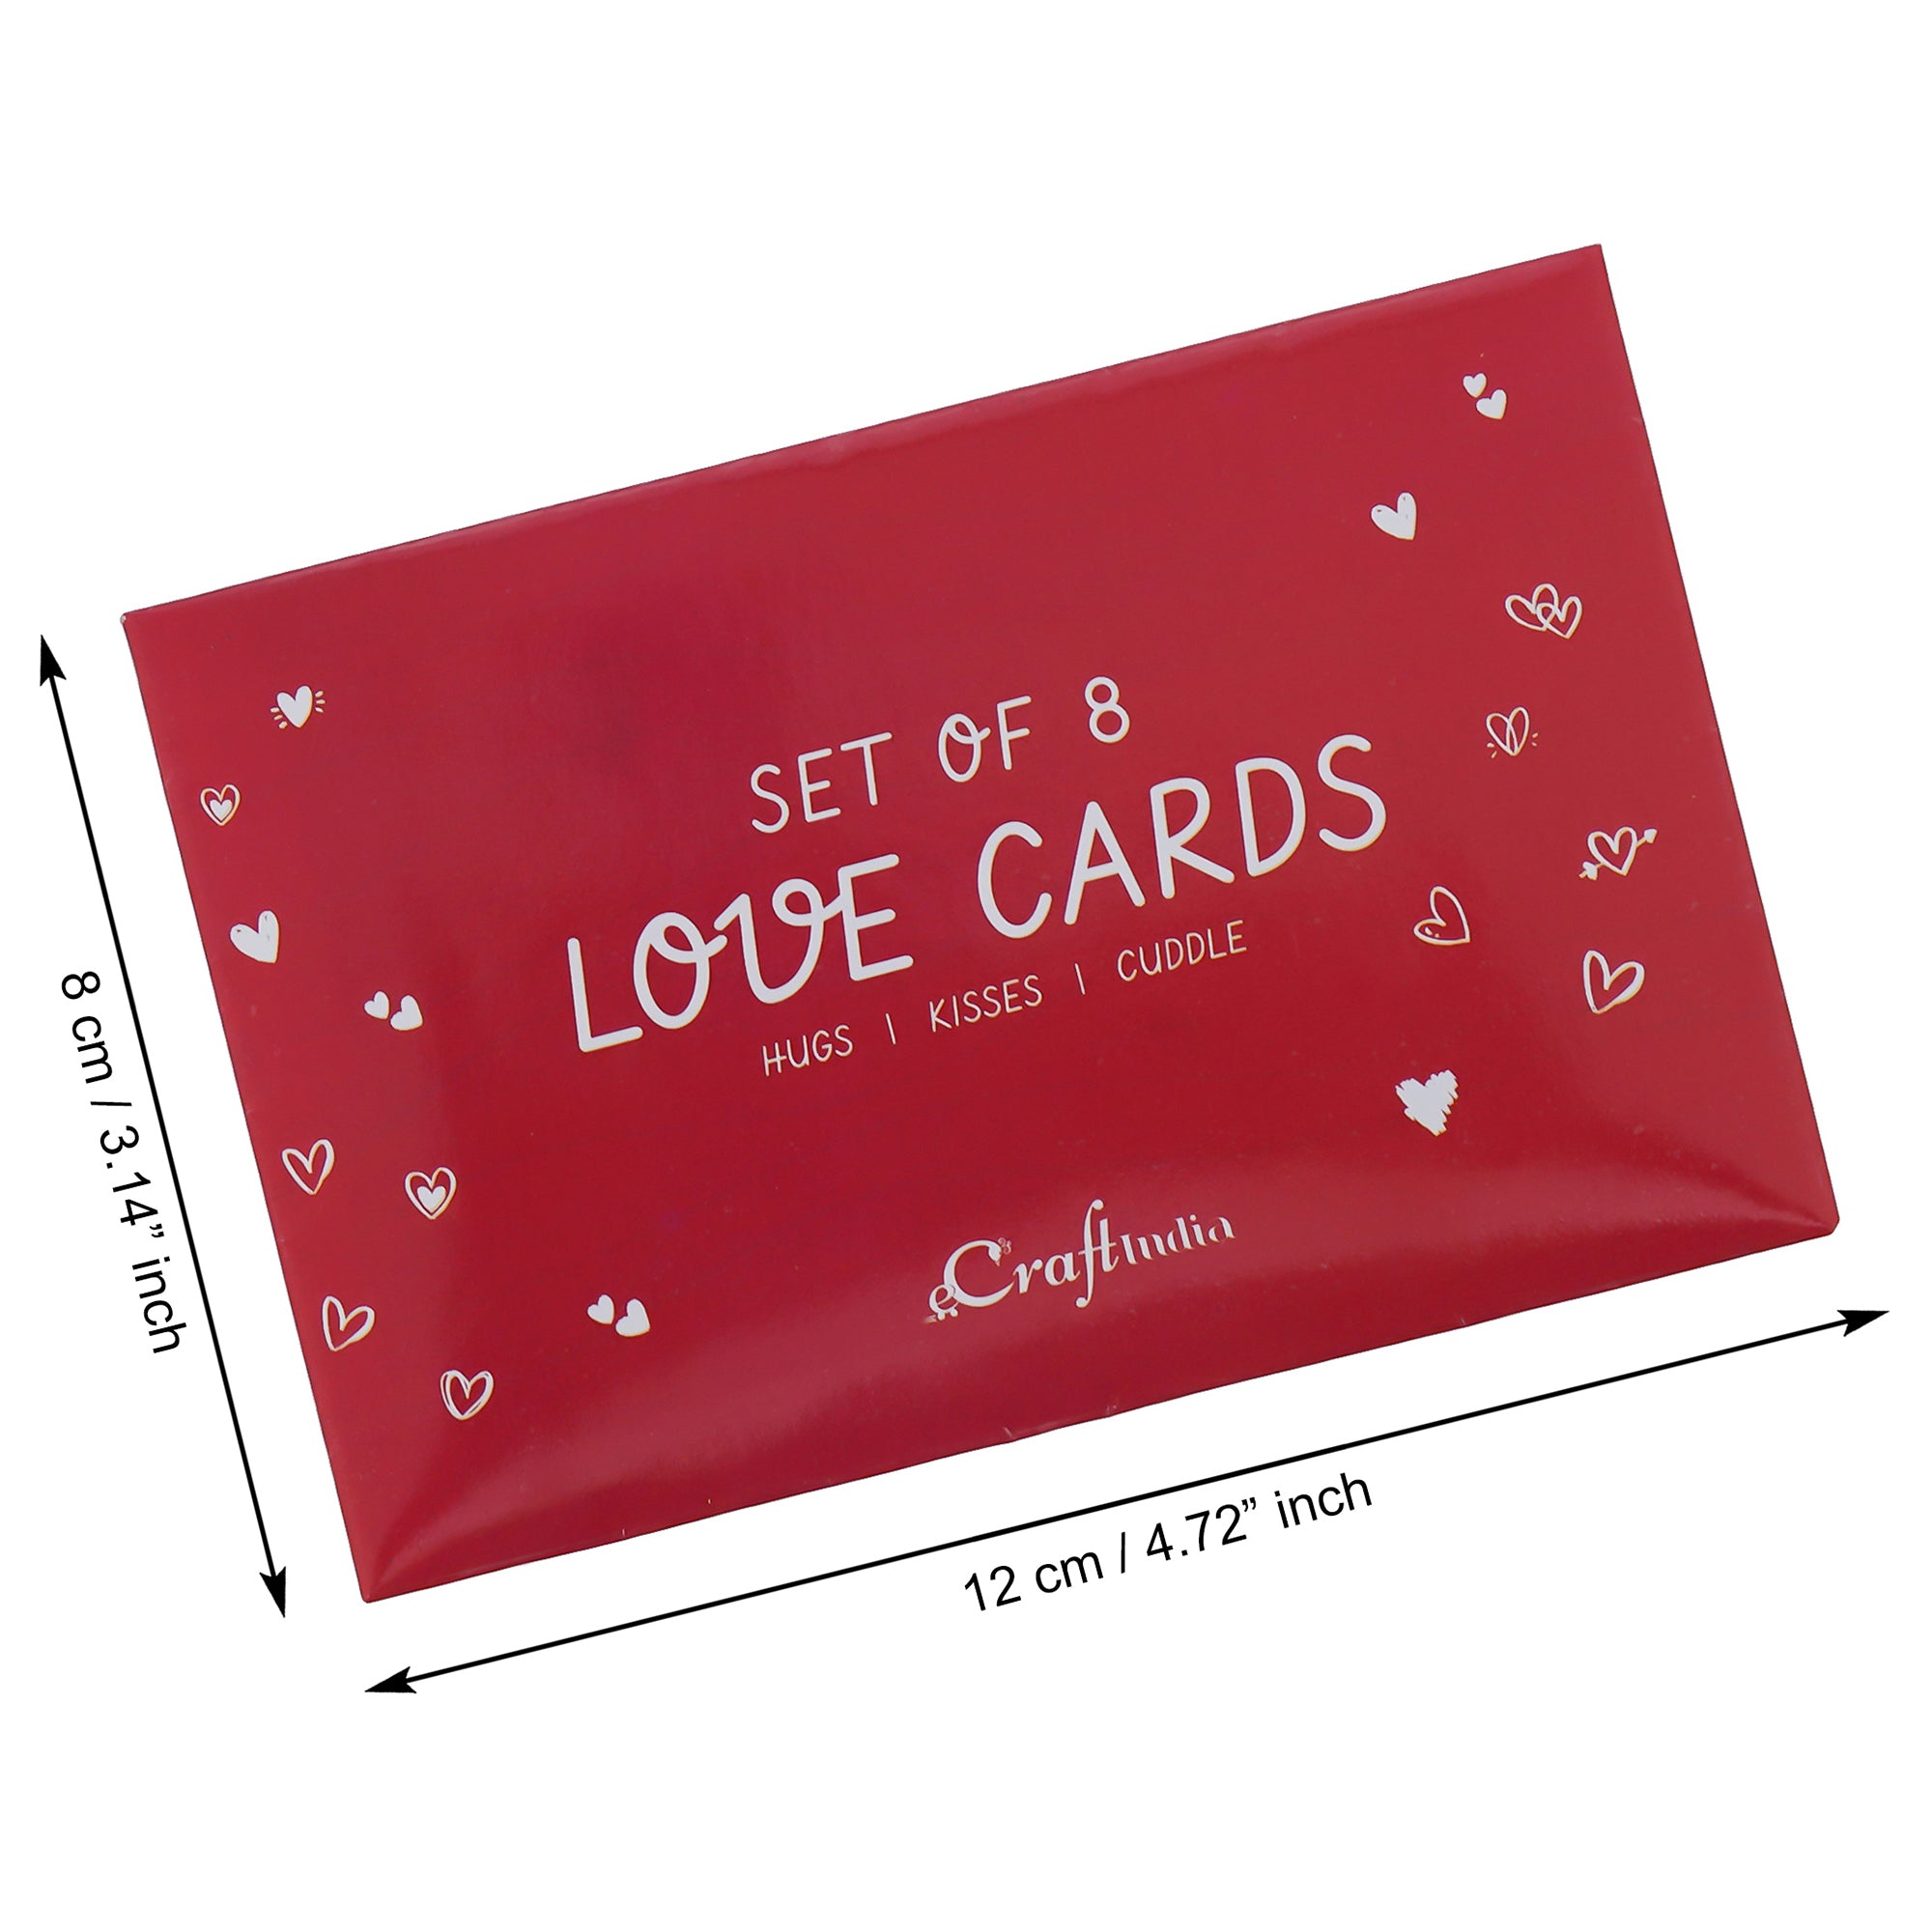 Valentine Combo of Pack of 8 Love Gift Cards, "20 Reasons Why I Love You" Printed on Little Hearts Wooden Gift Set, Red Roses Bouquet and White, Red Teddy Bear Valentine's Rectangle Shaped Gift Box 2